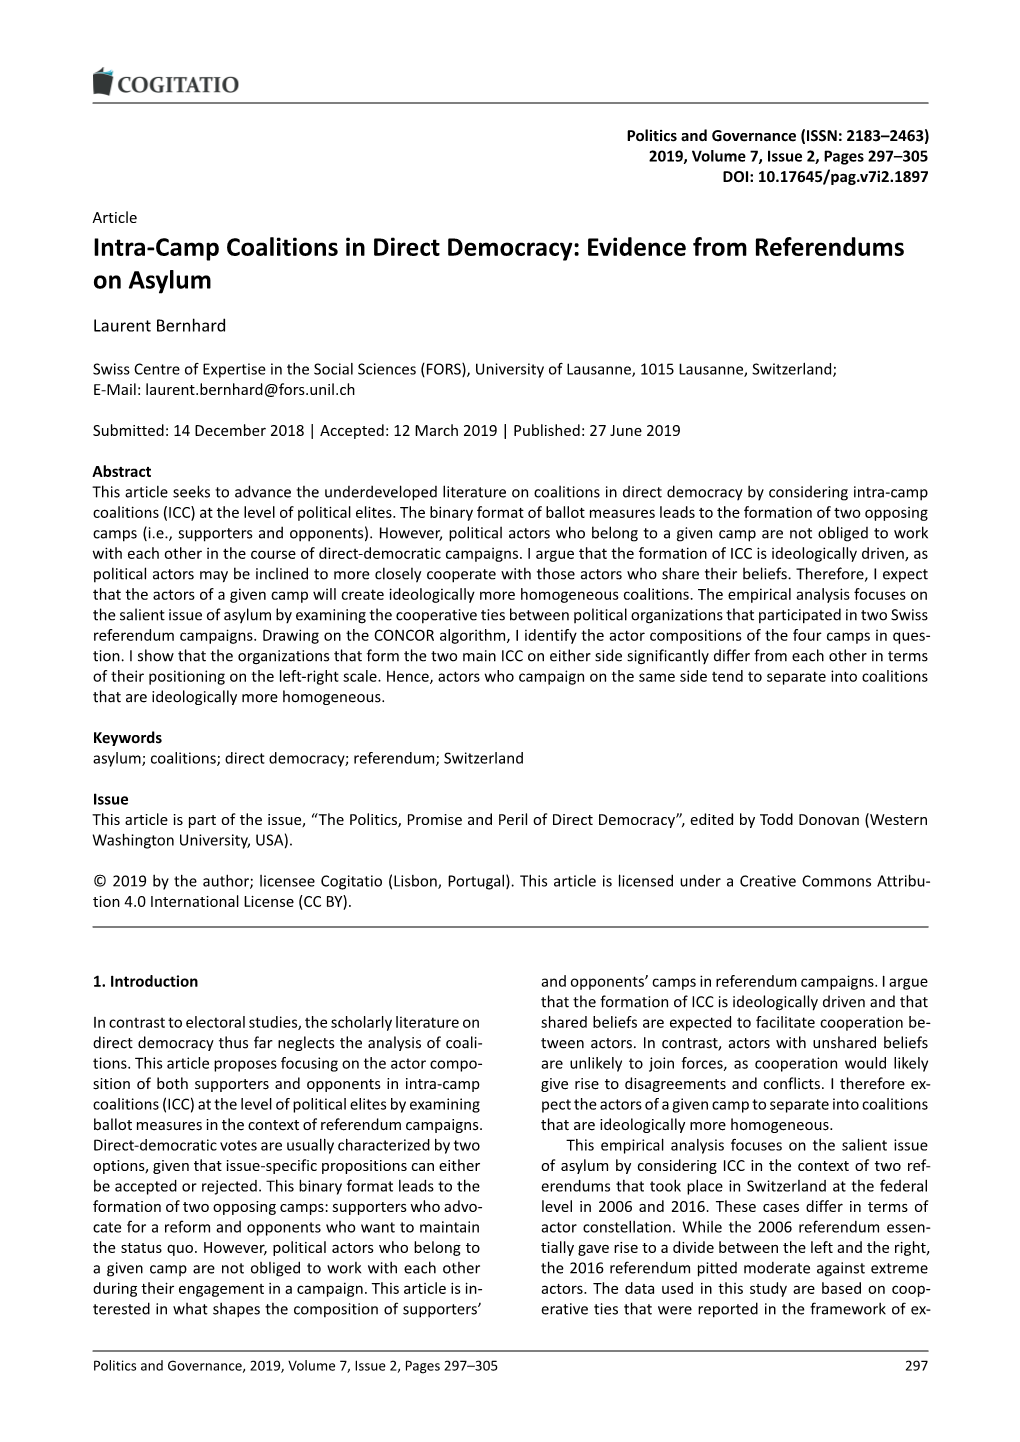 Intra-Camp Coalitions in Direct Democracy: Evidence from Referendums on Asylum